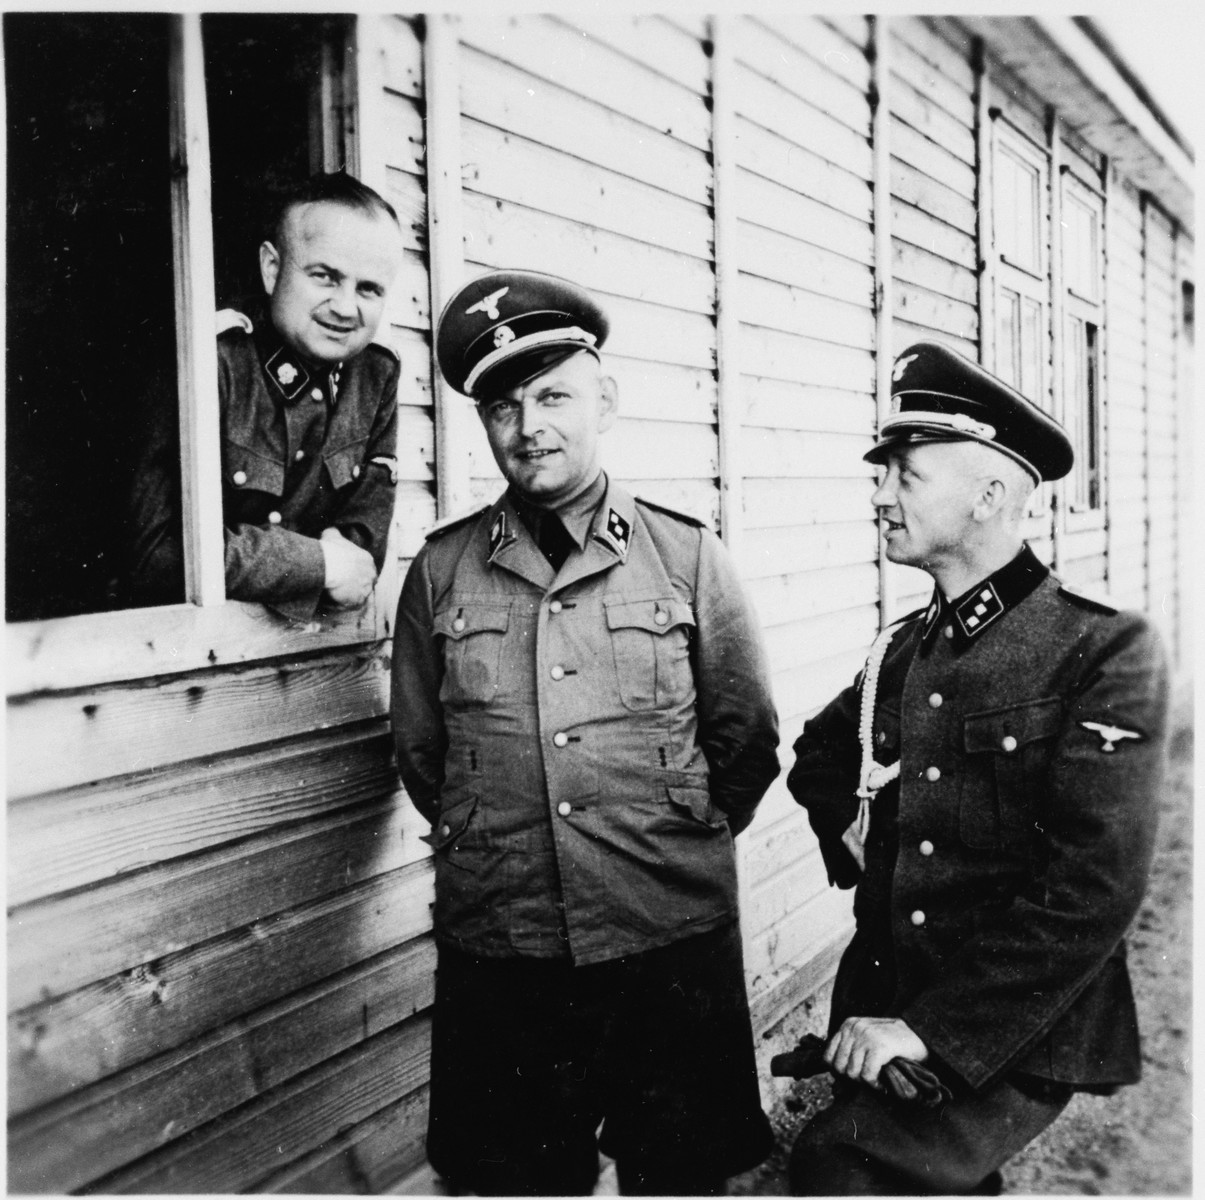 Close-up portrait of three SS officers in Gross-Rosen.

Pictured on the far right is the adjutant Kuno Schramm.